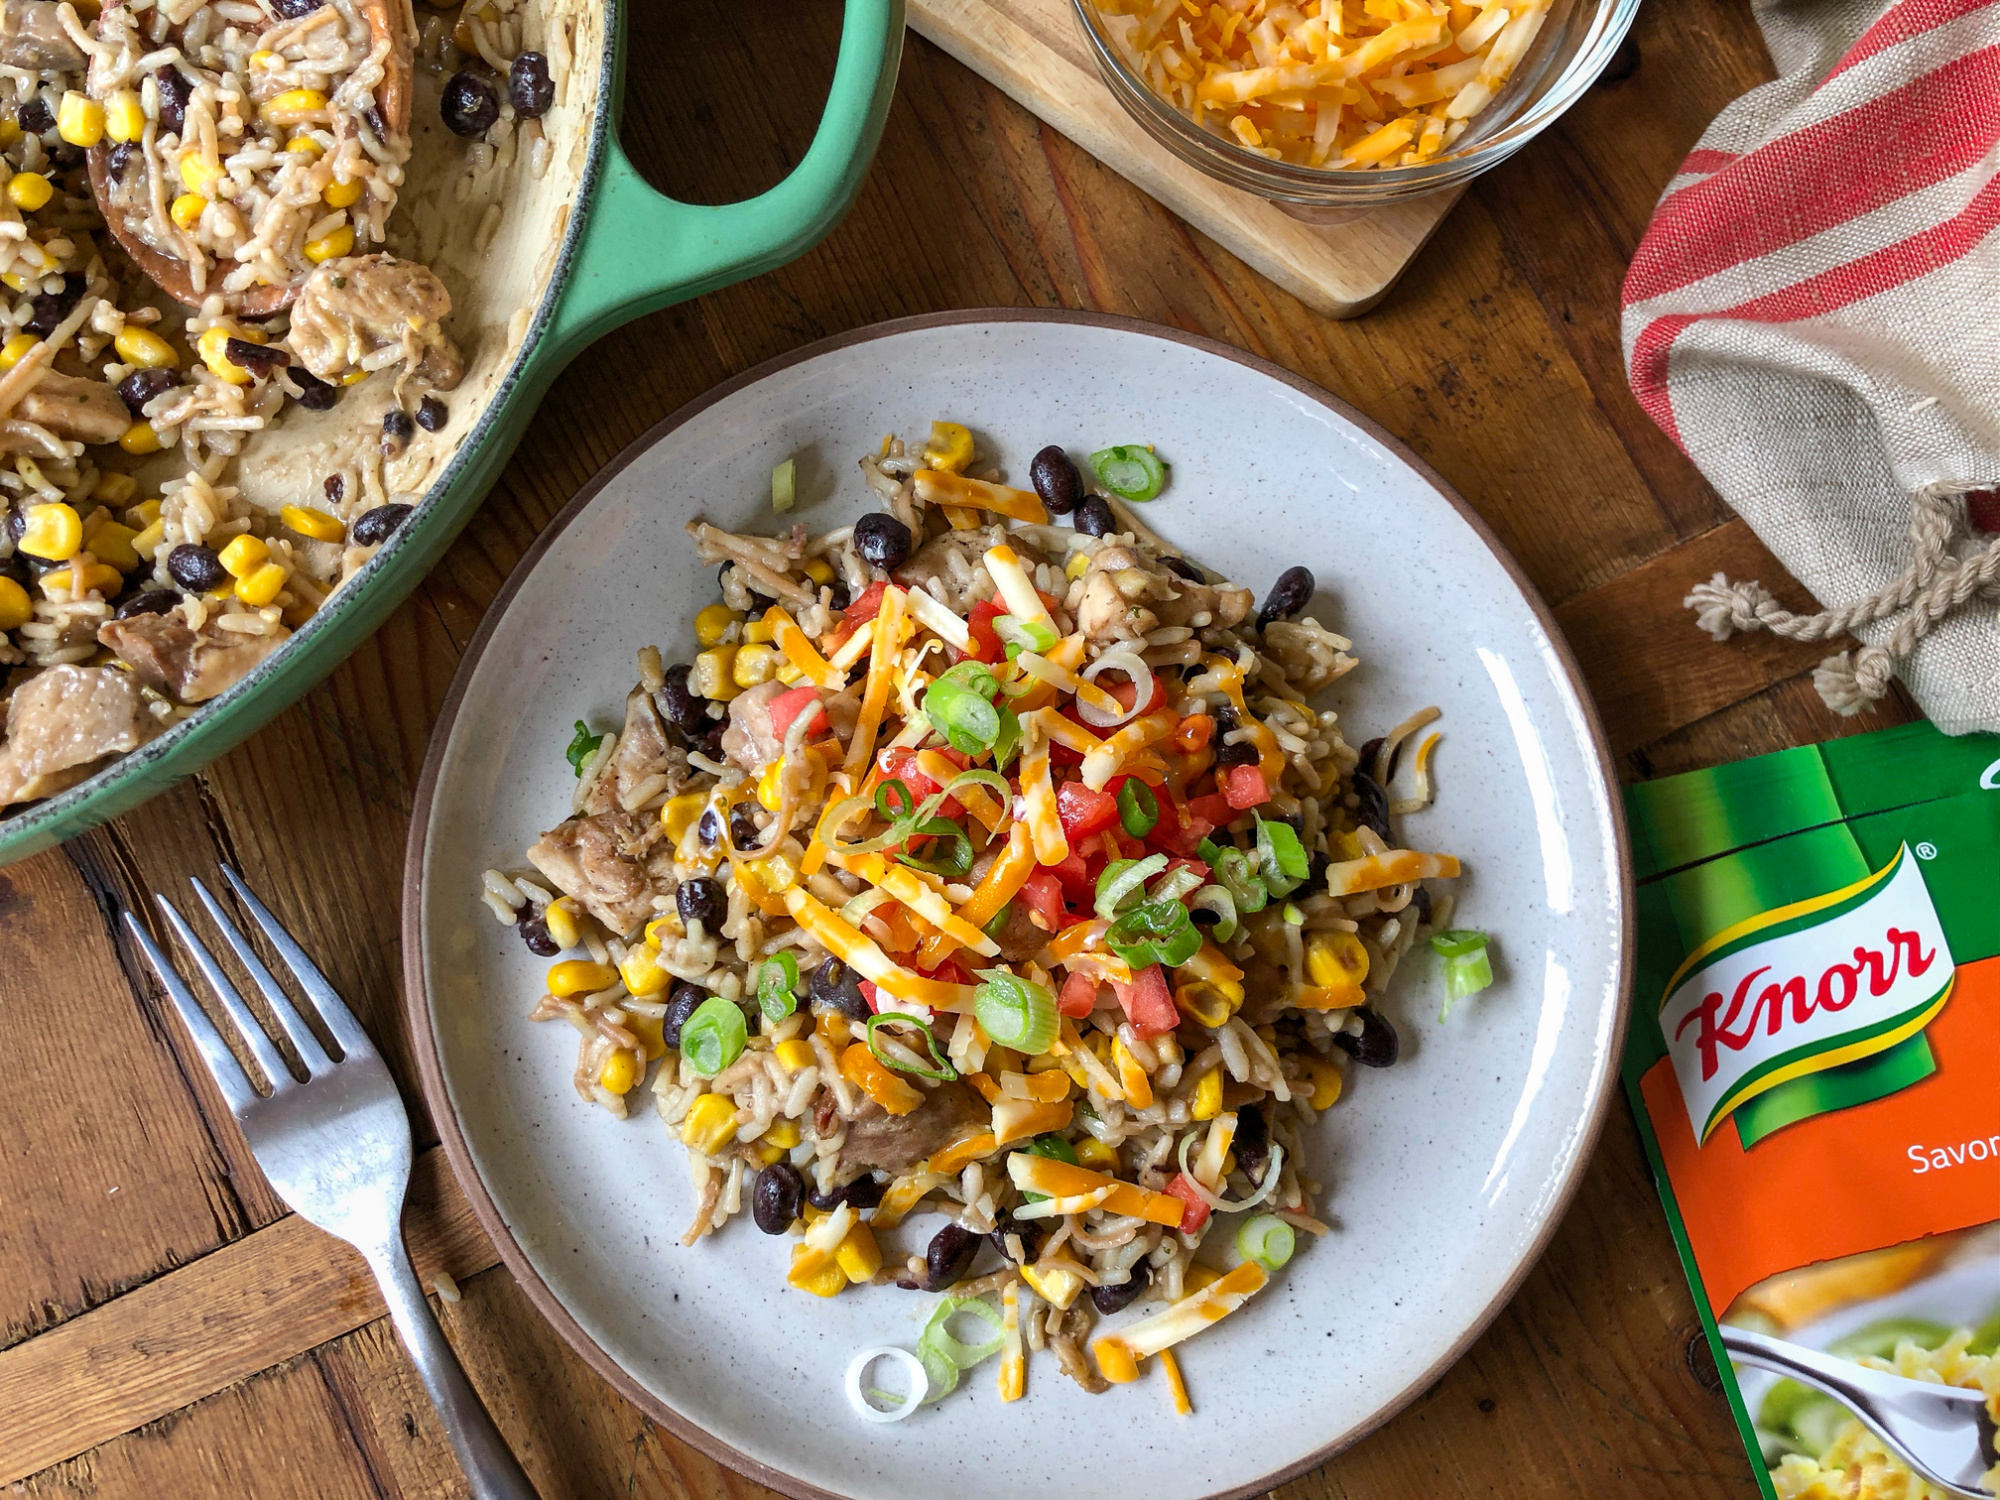 Serve Up Dinner In 15 Minutes With This Cheesy Chicken Fiesta Recipe! on I Heart Publix